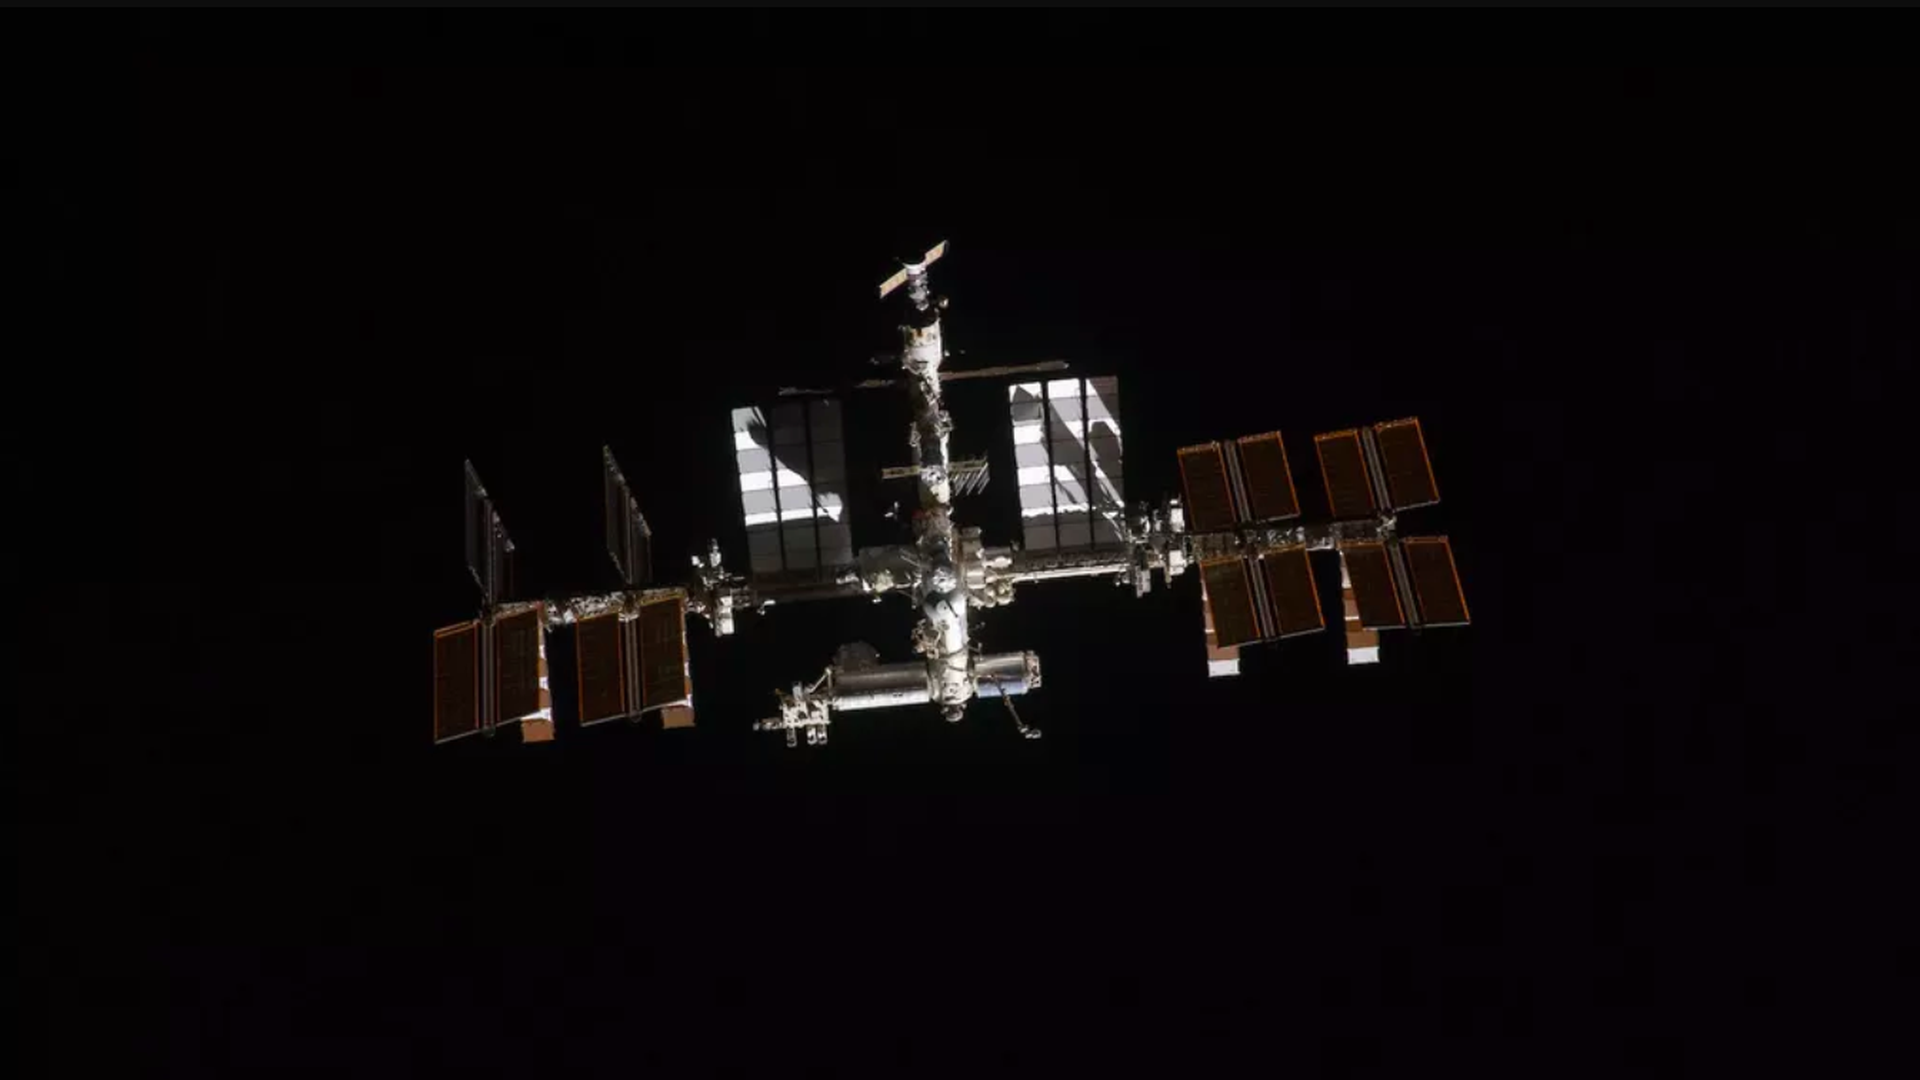 This image shows the International Space Station surrounded by space.